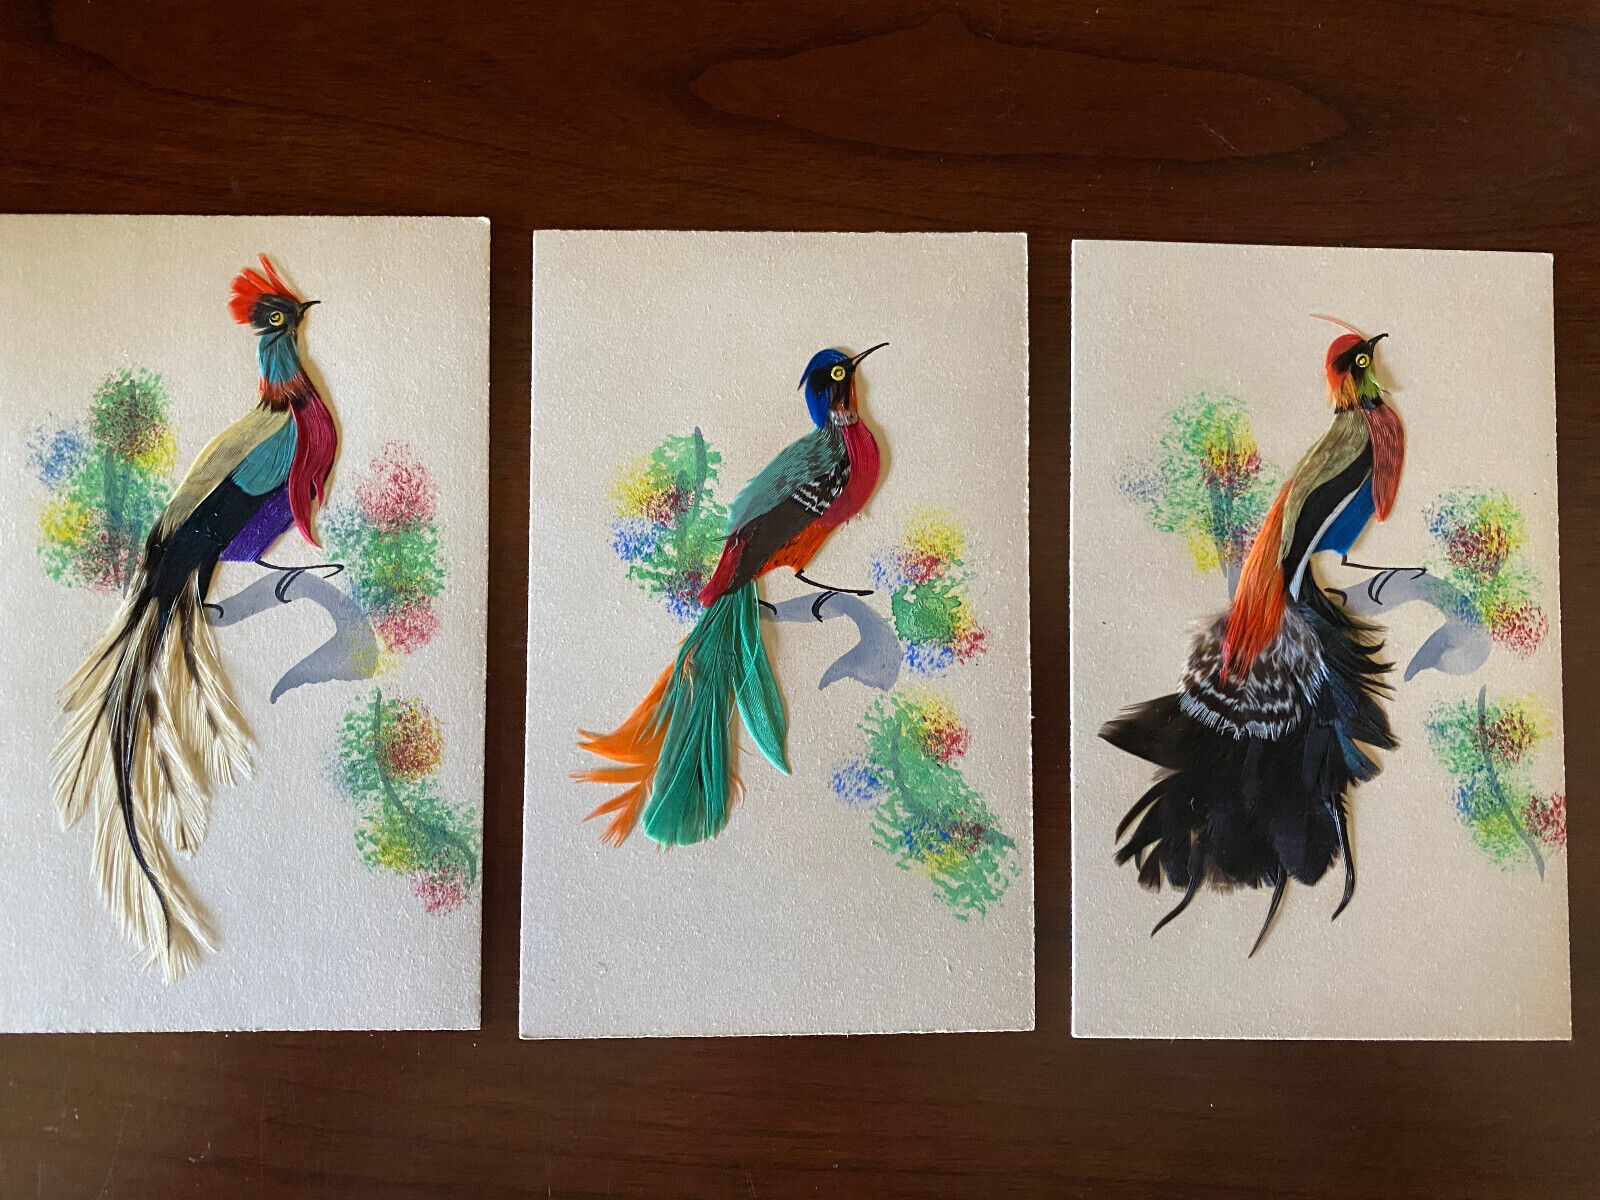 Lot of 4 Vintage Bird Paintings - Real Feathers - LOT OF 3